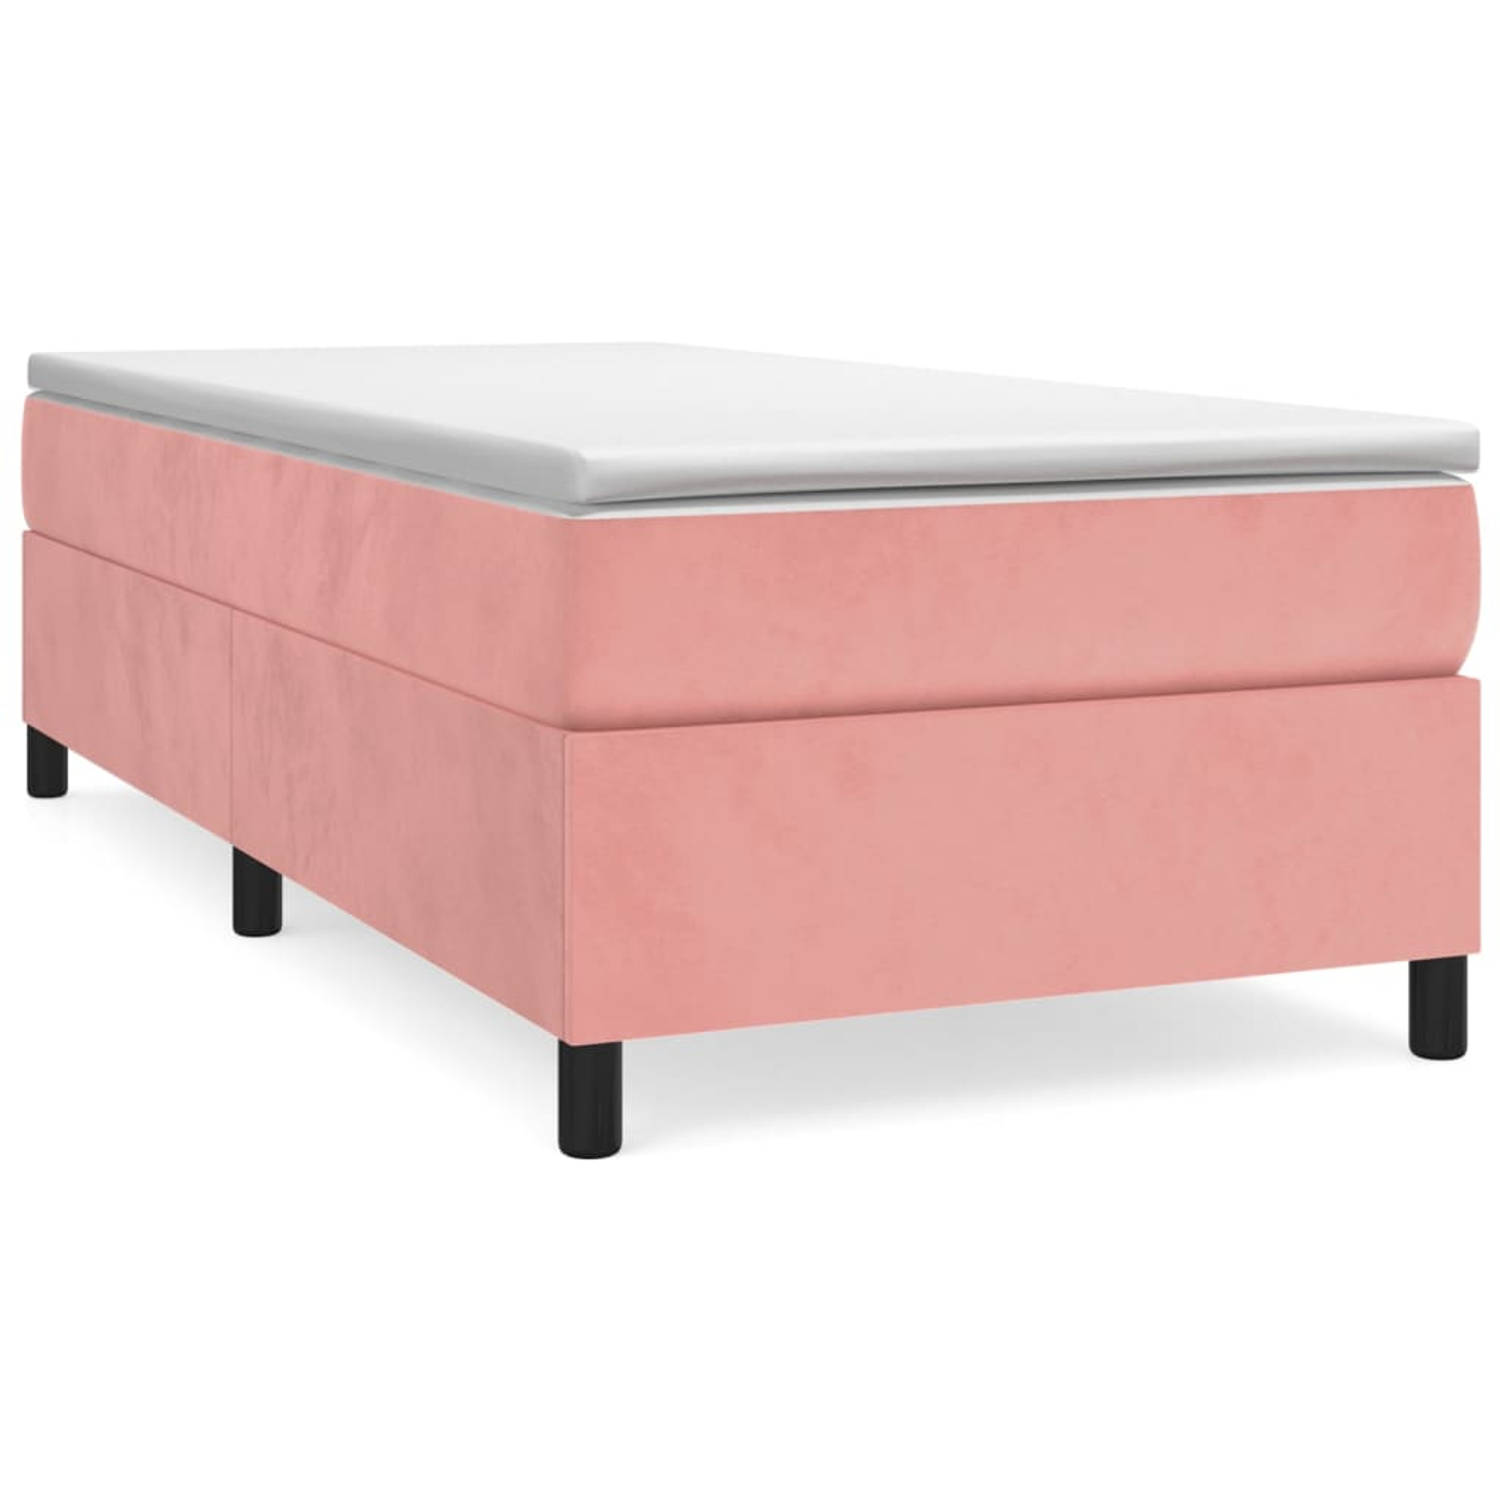 The Living Store Boxspringframe fluweel roze 90x200 cm - Bed